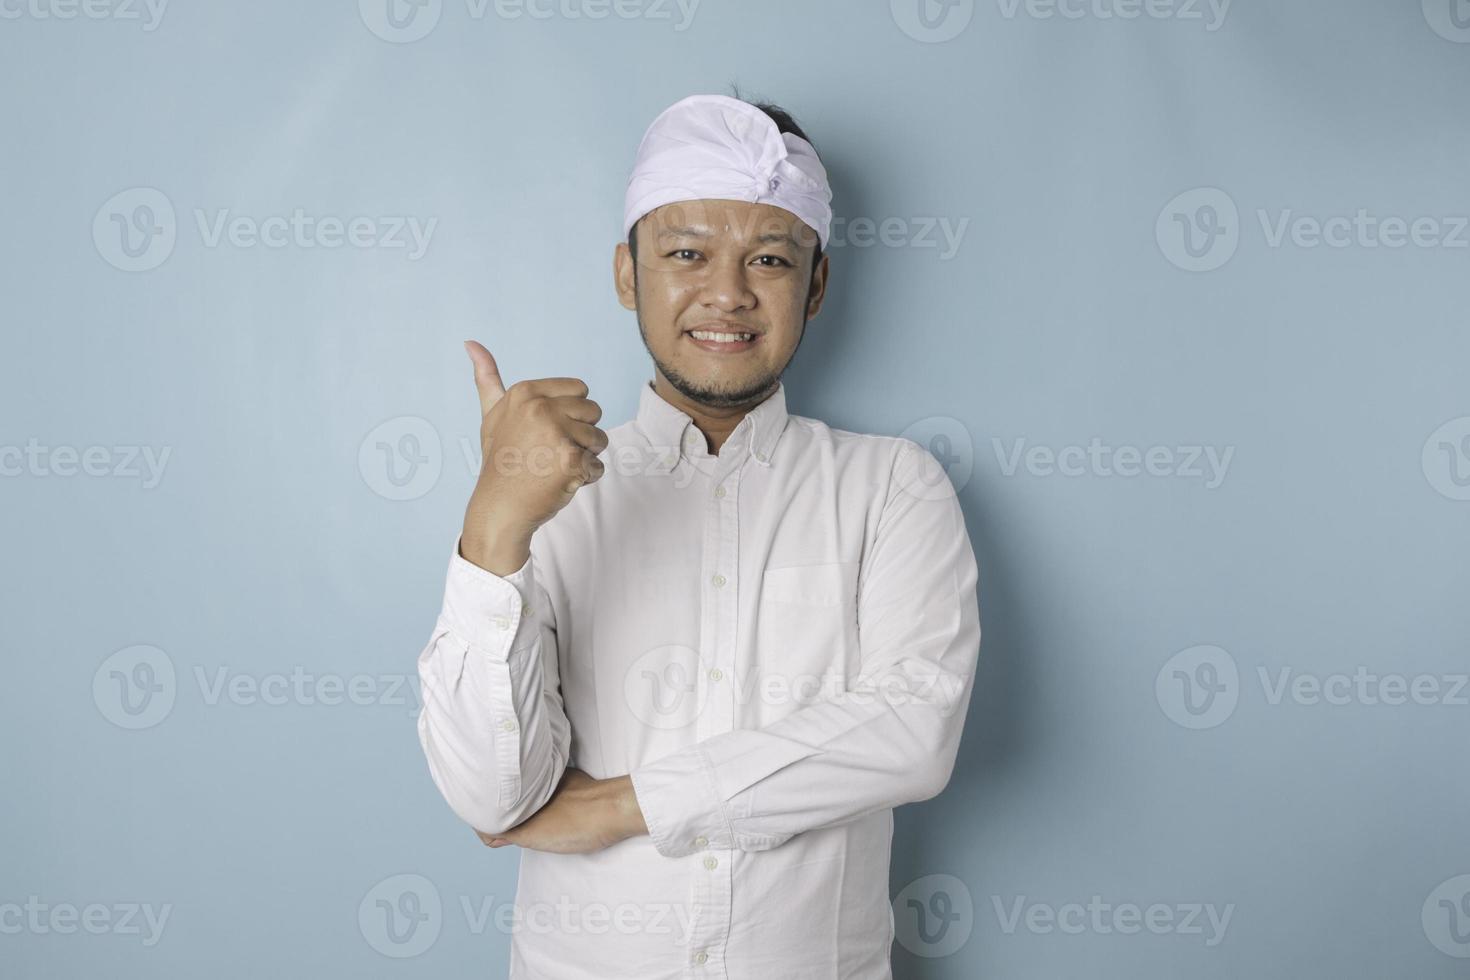 Excited Balinese man wearing udeng or traditional headband and white shirt gives thumbs up hand gesture of approval, isolated by blue background photo